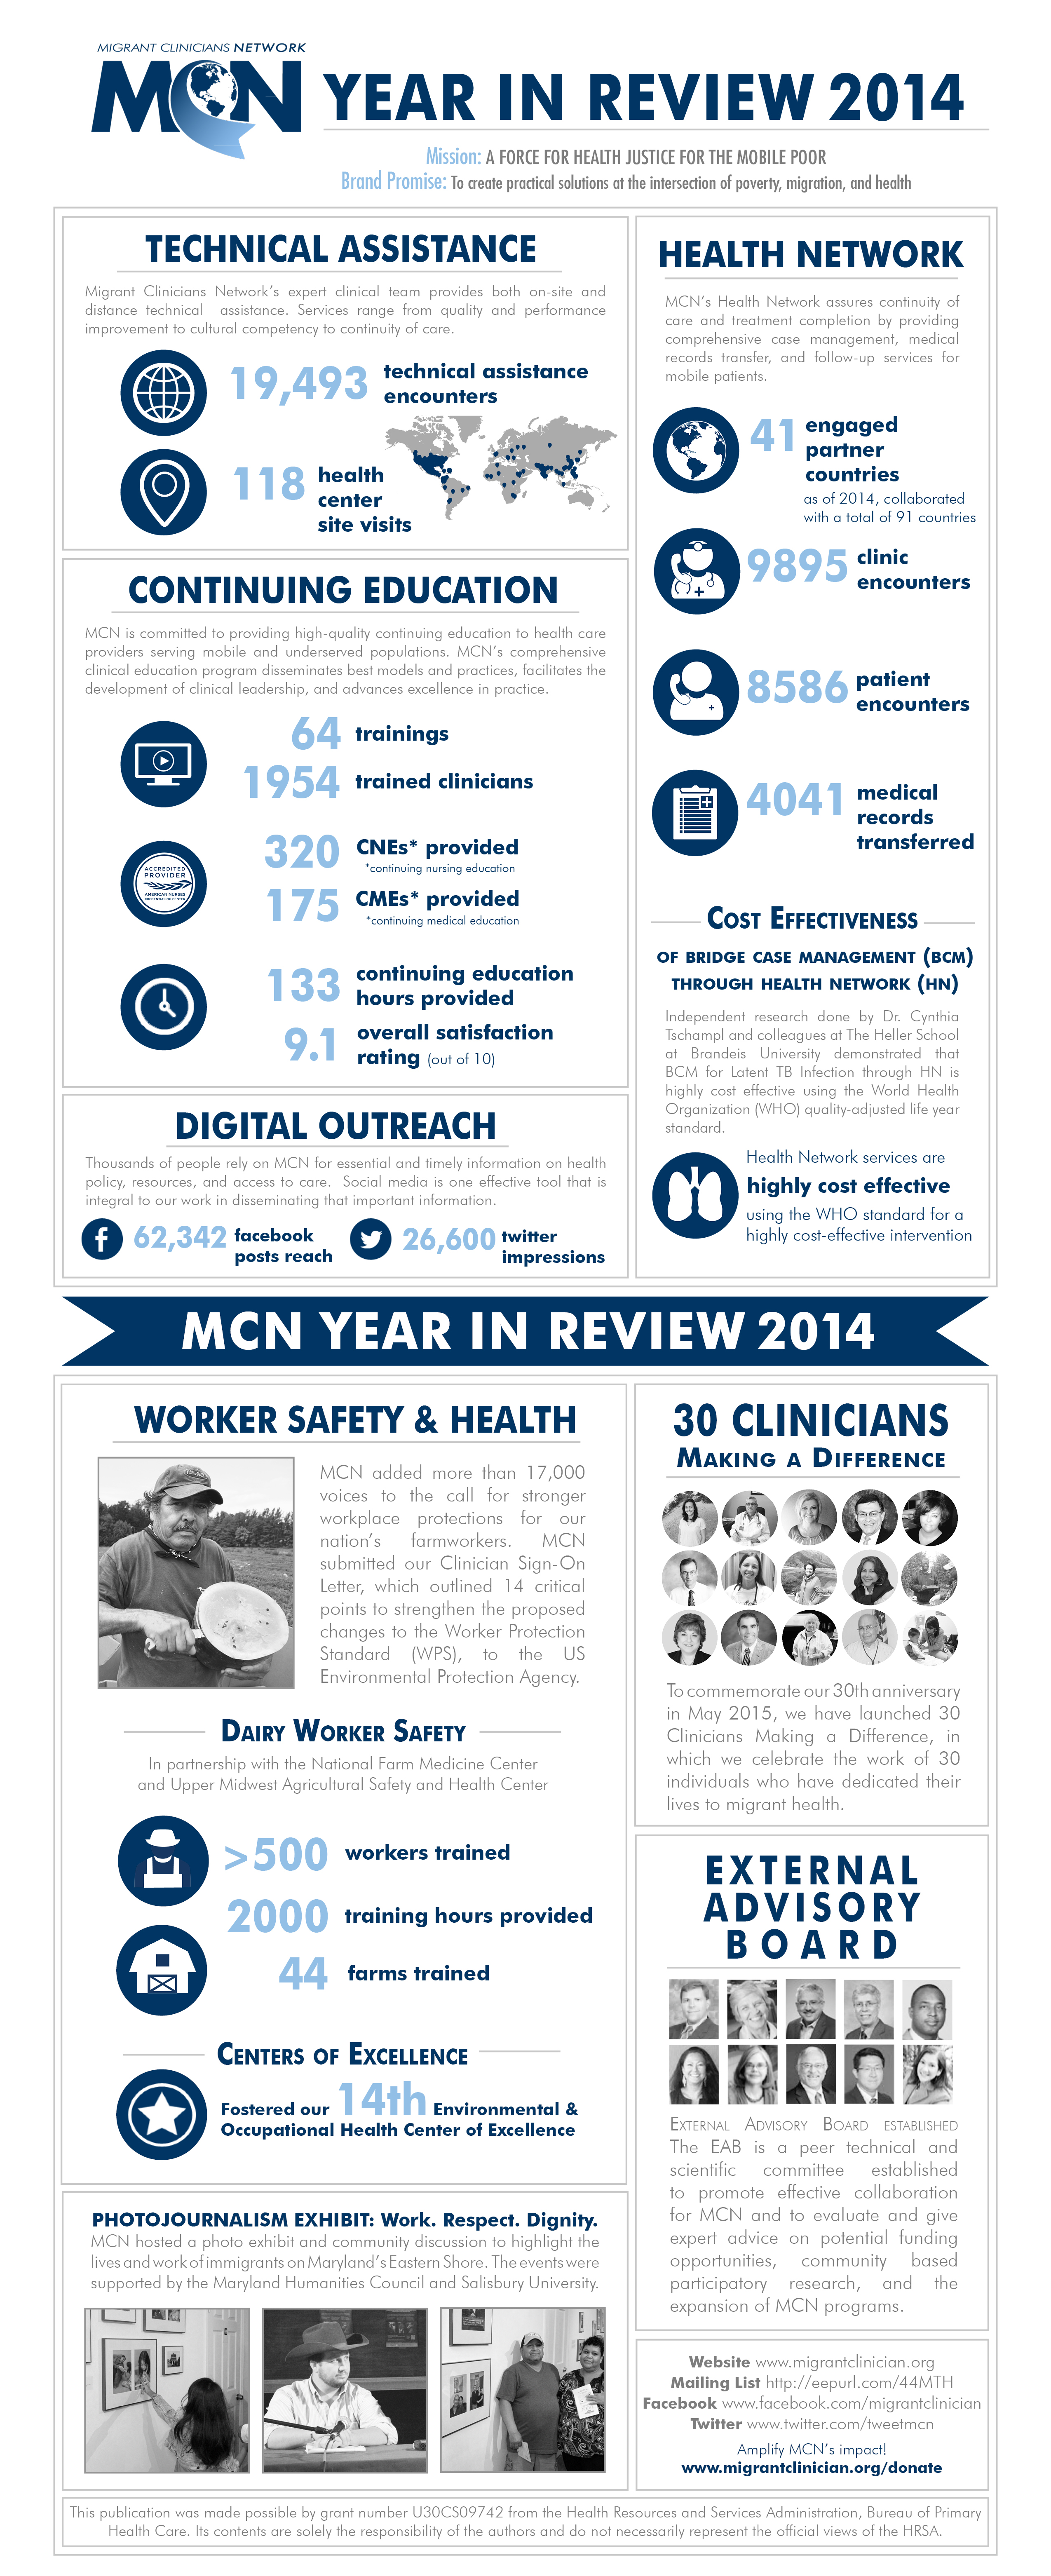 MCN Year in Review 2014